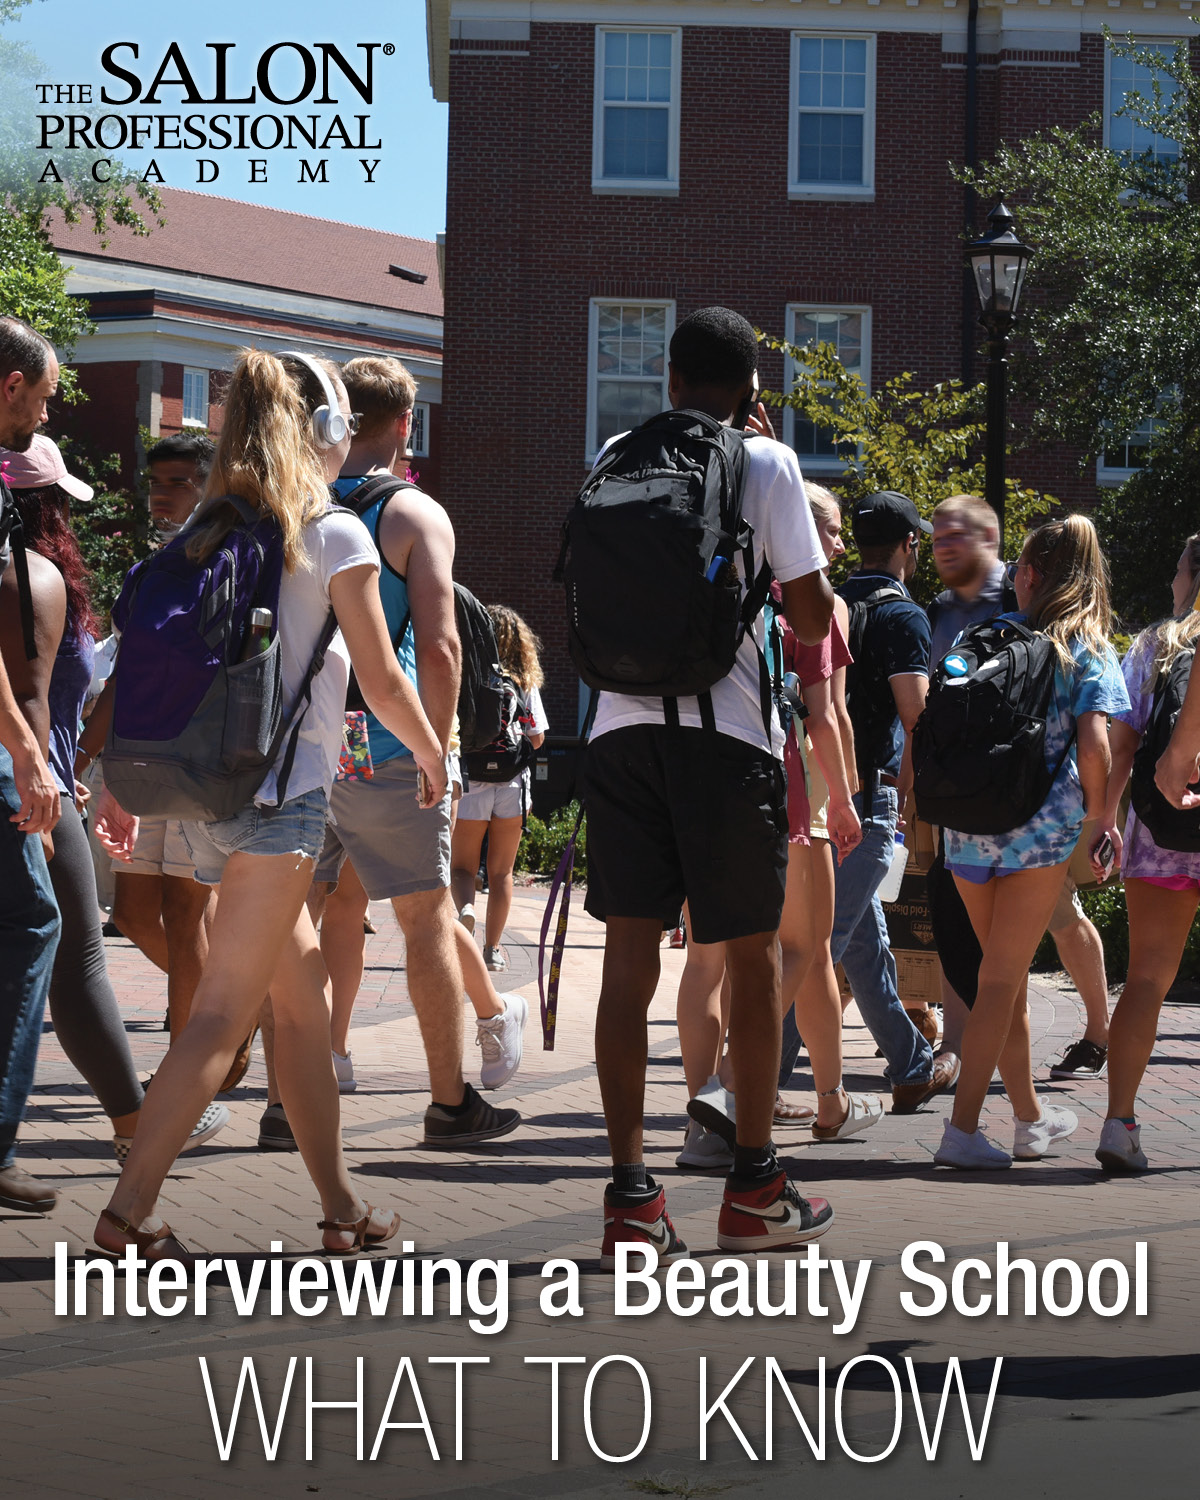 How to Interview a Beauty School: 7 Questions You Should Ask - TSPA  Evansville Beauty School